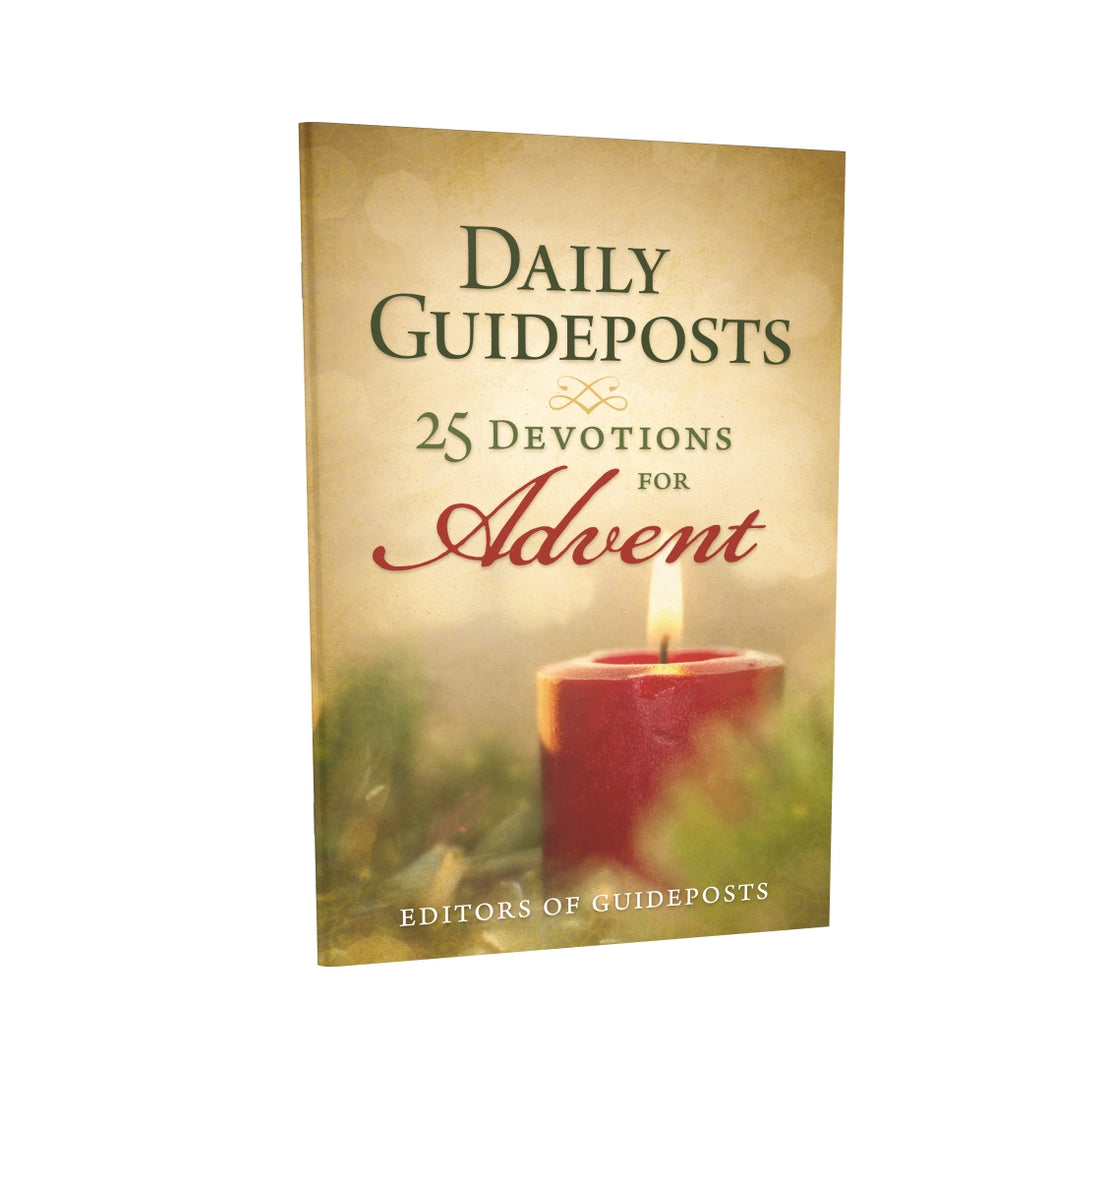 Daily Guideposts: 25 Devotions for Advent